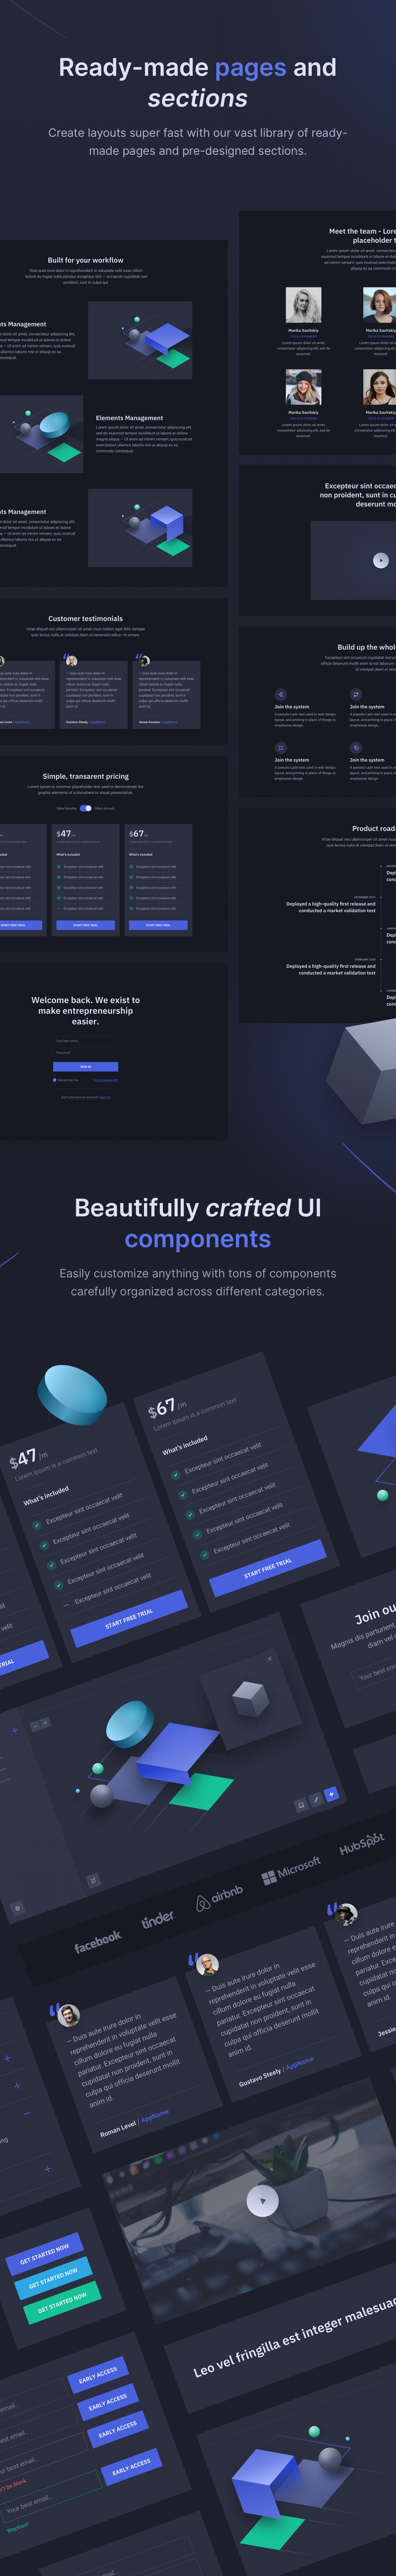 Cube - React Landing Page Template for Startups - 3